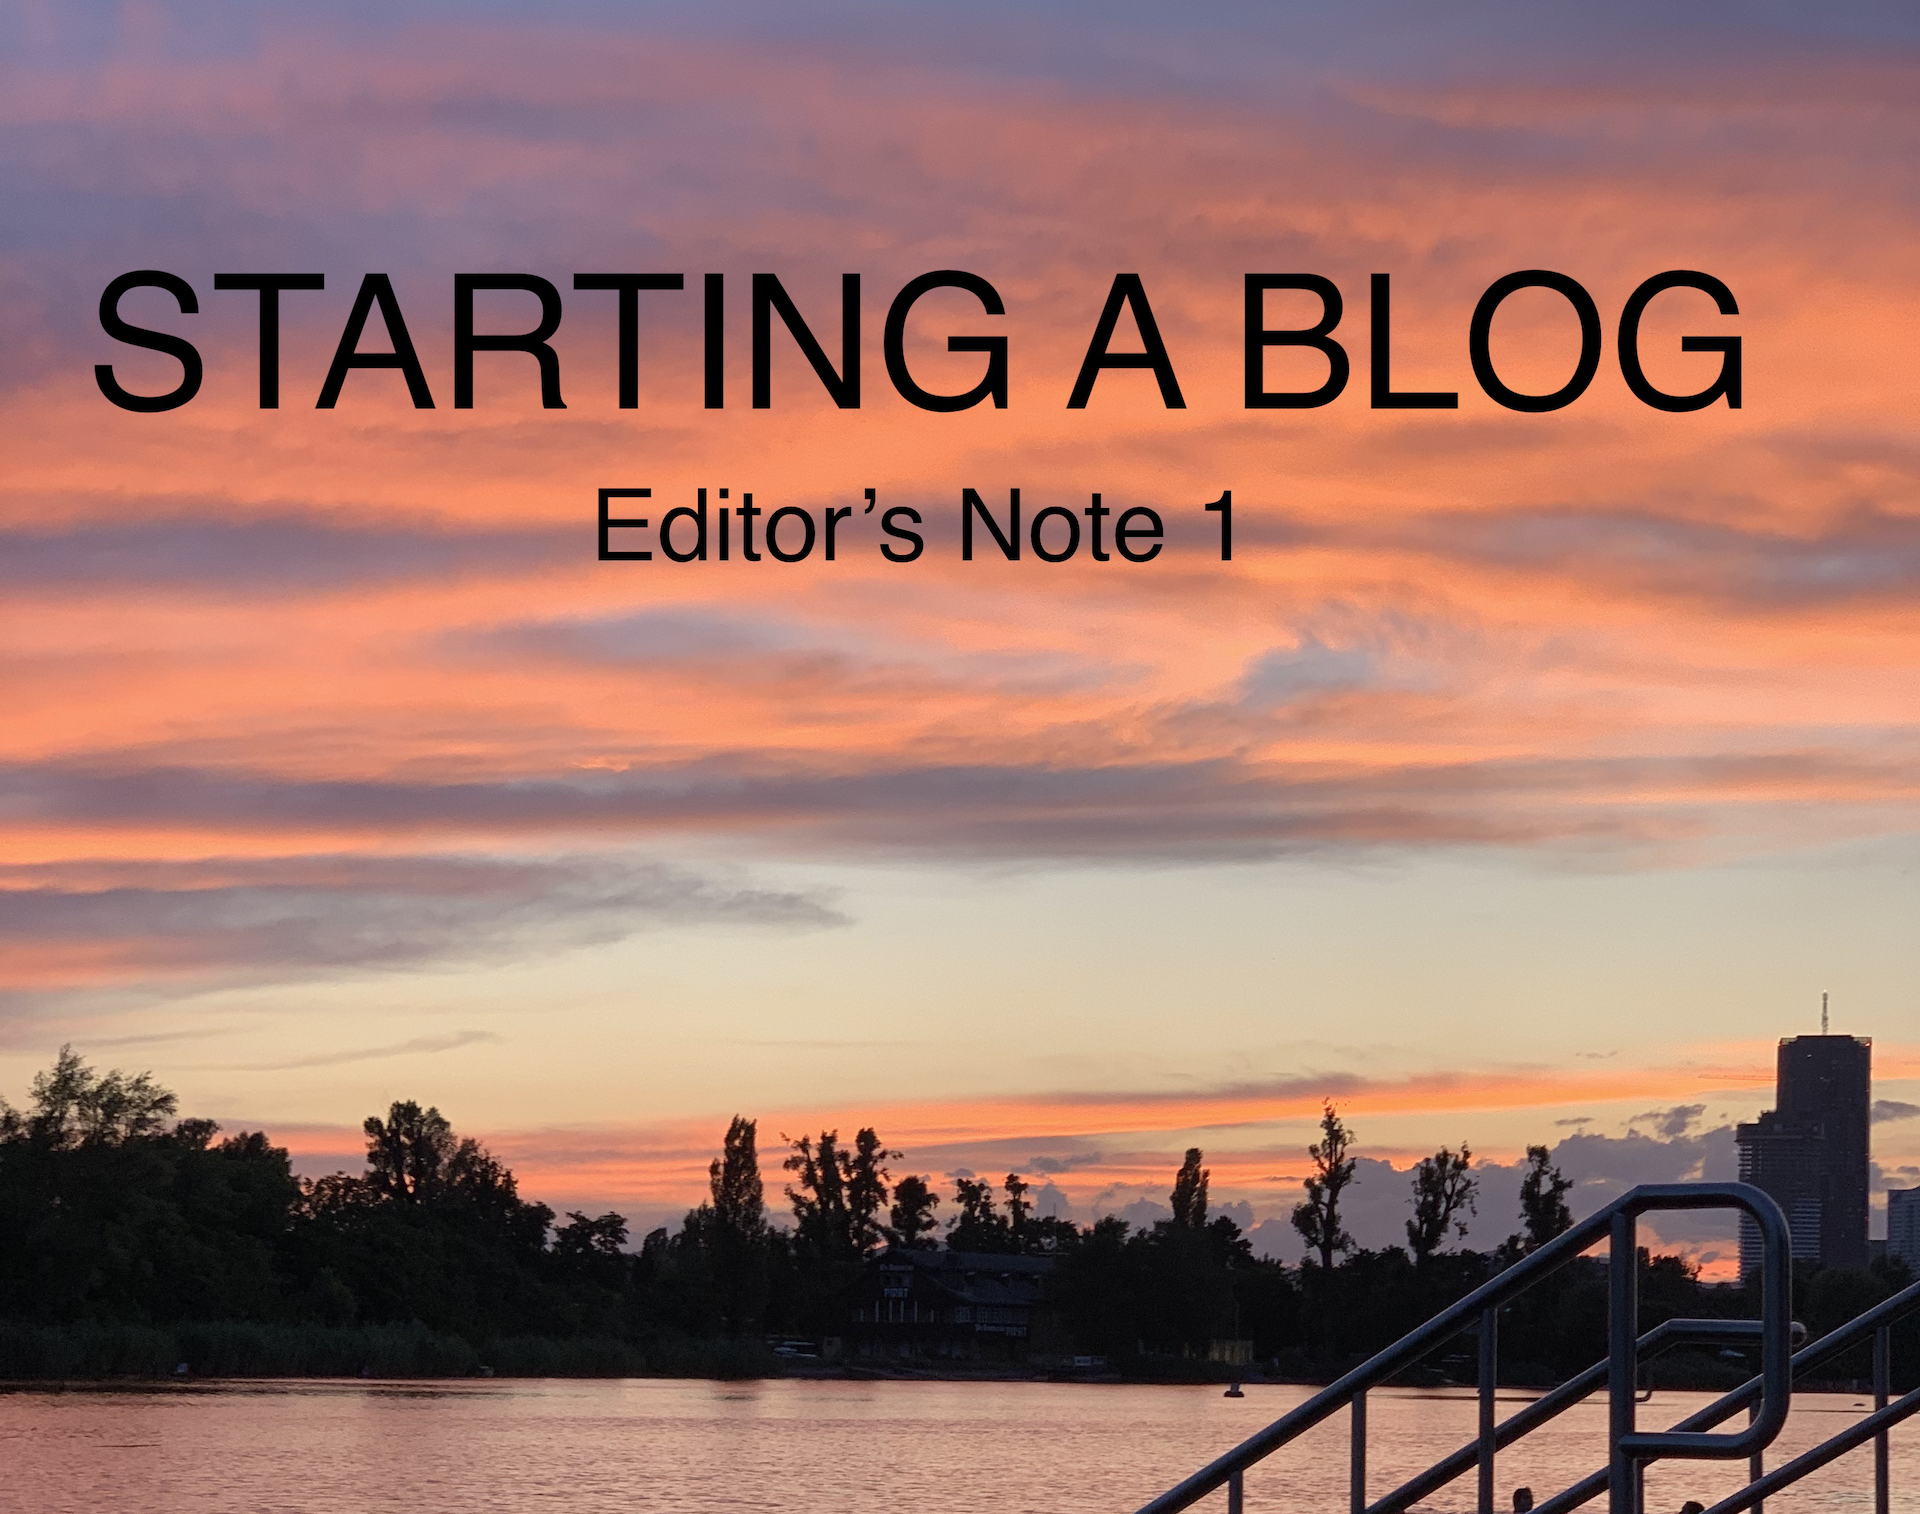 Thumbnail for Editor's note 1 - starting a blog